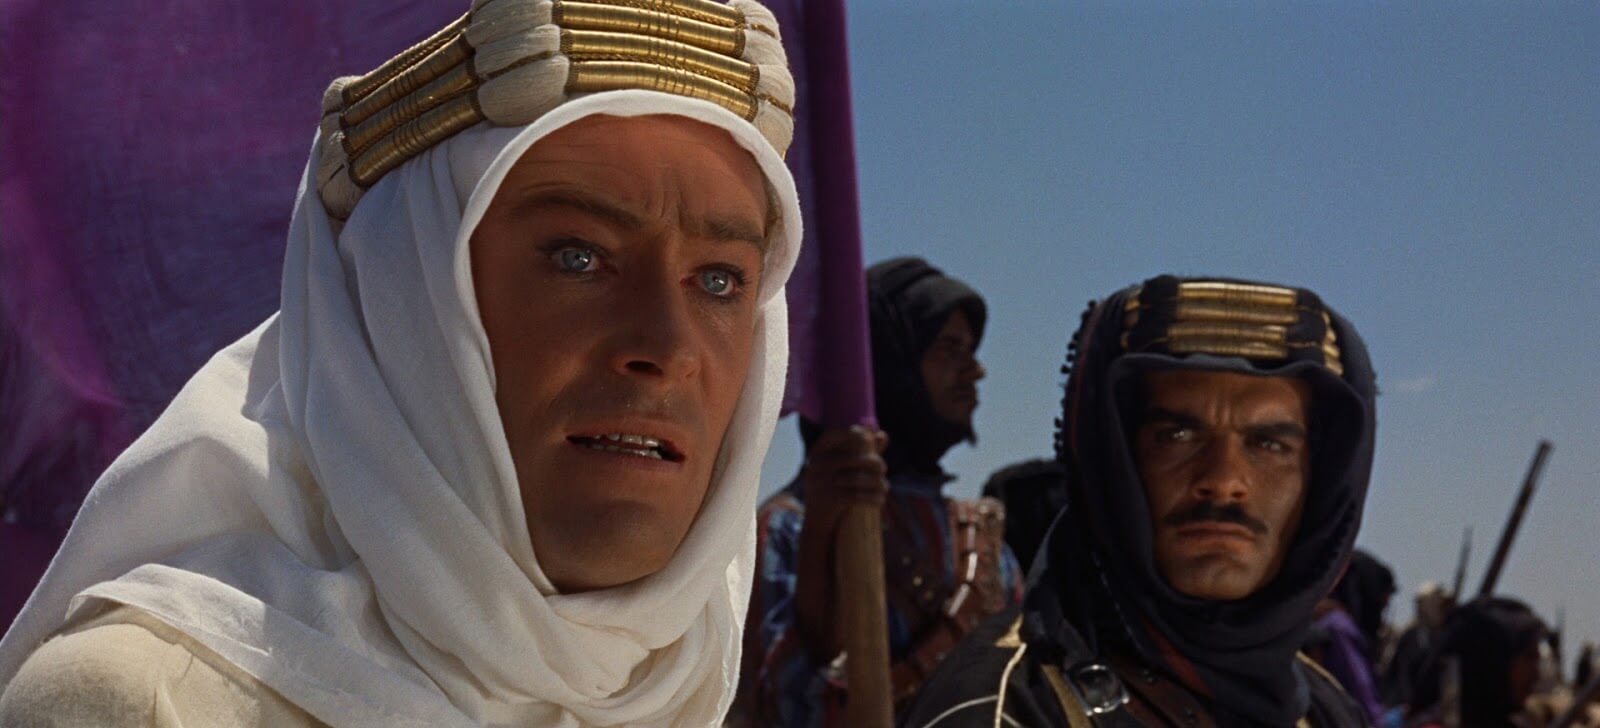 Lawrence of Arabia is absolutly stunning on the new 4K projector